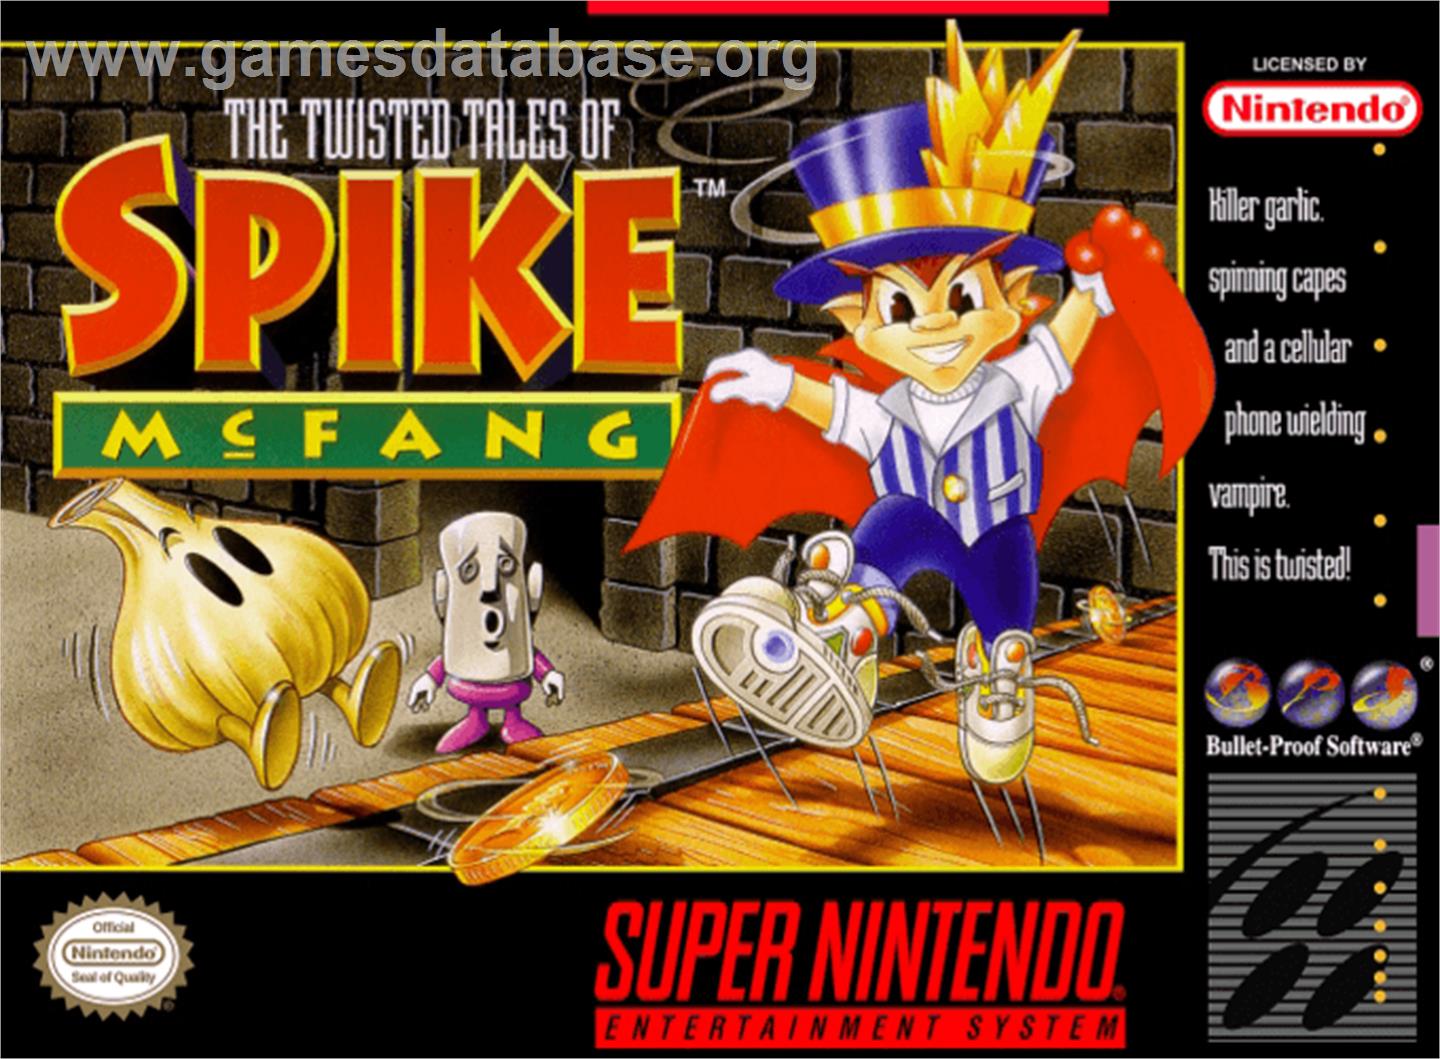 The Twisted Tales of Spike McFang - Nintendo SNES - Artwork - Box